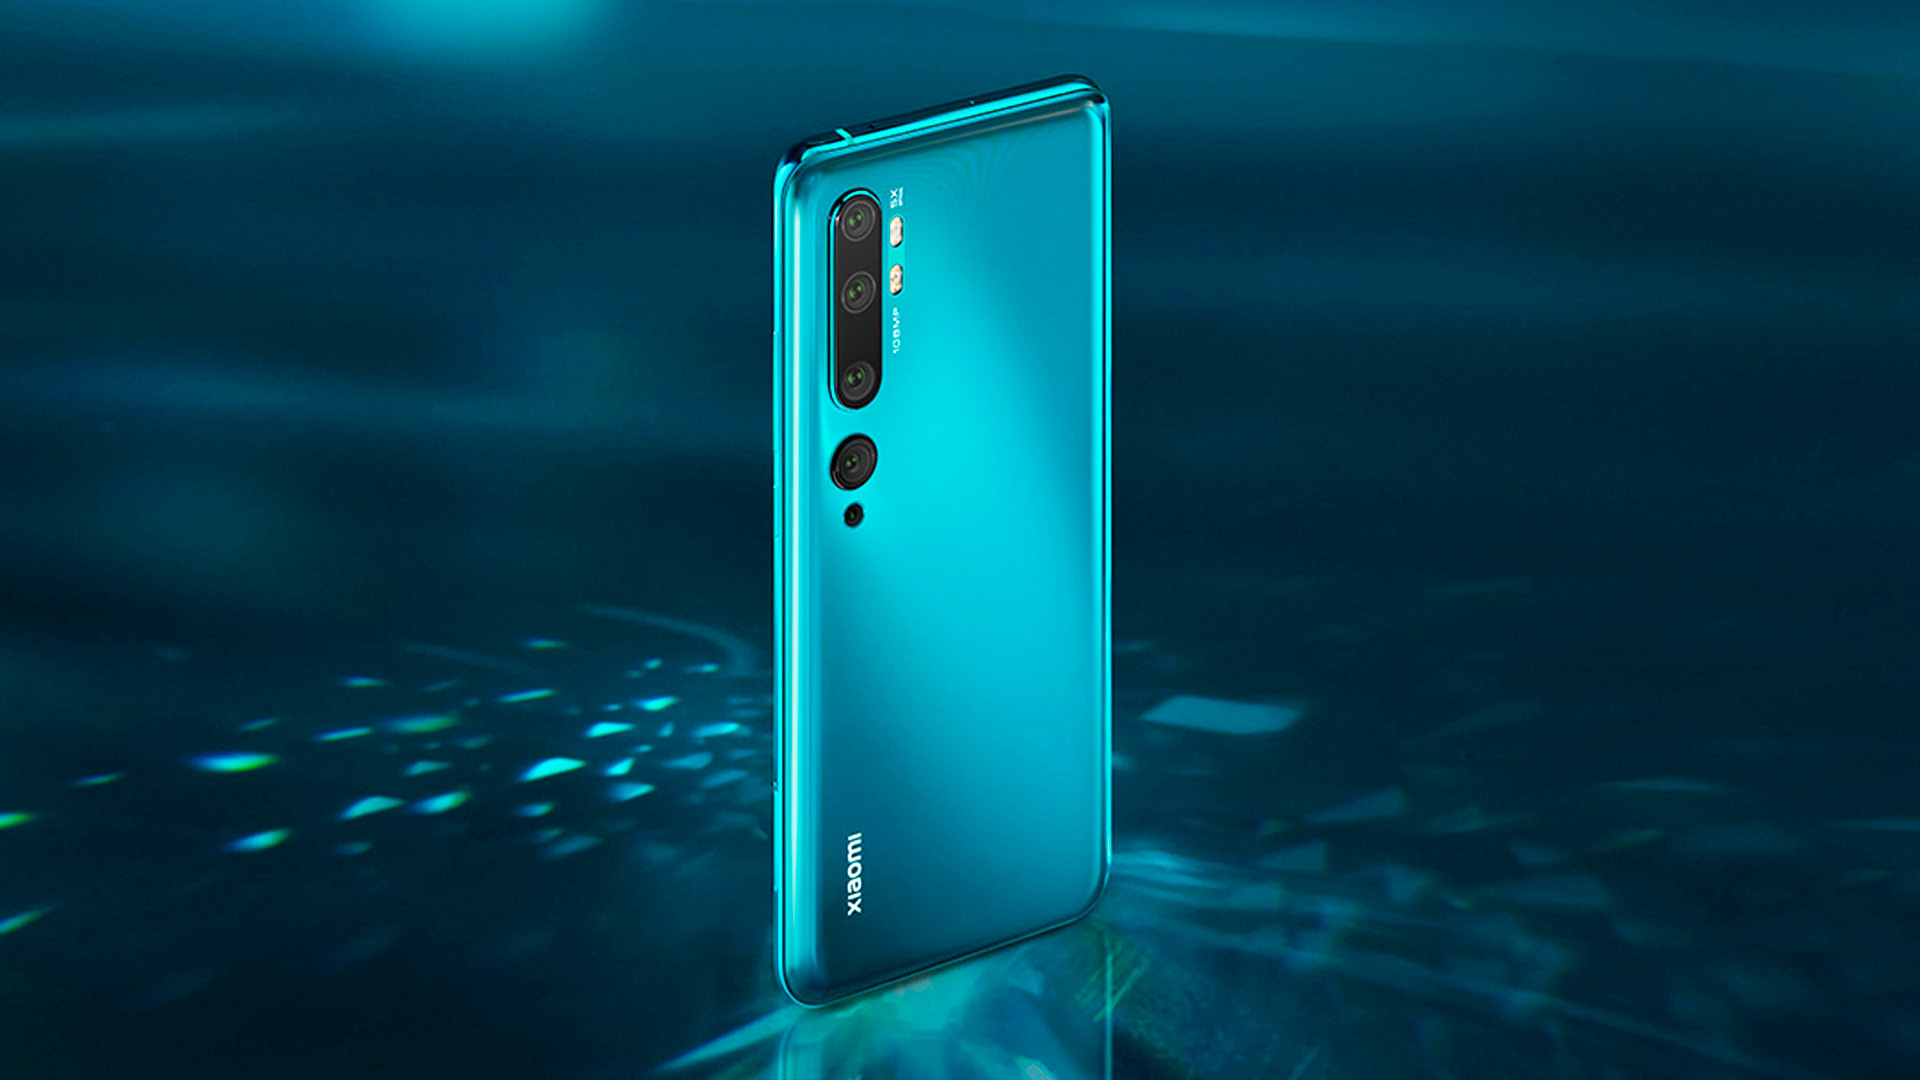 Xiaomi Mi CC9 Pro comes with Android 10 in April